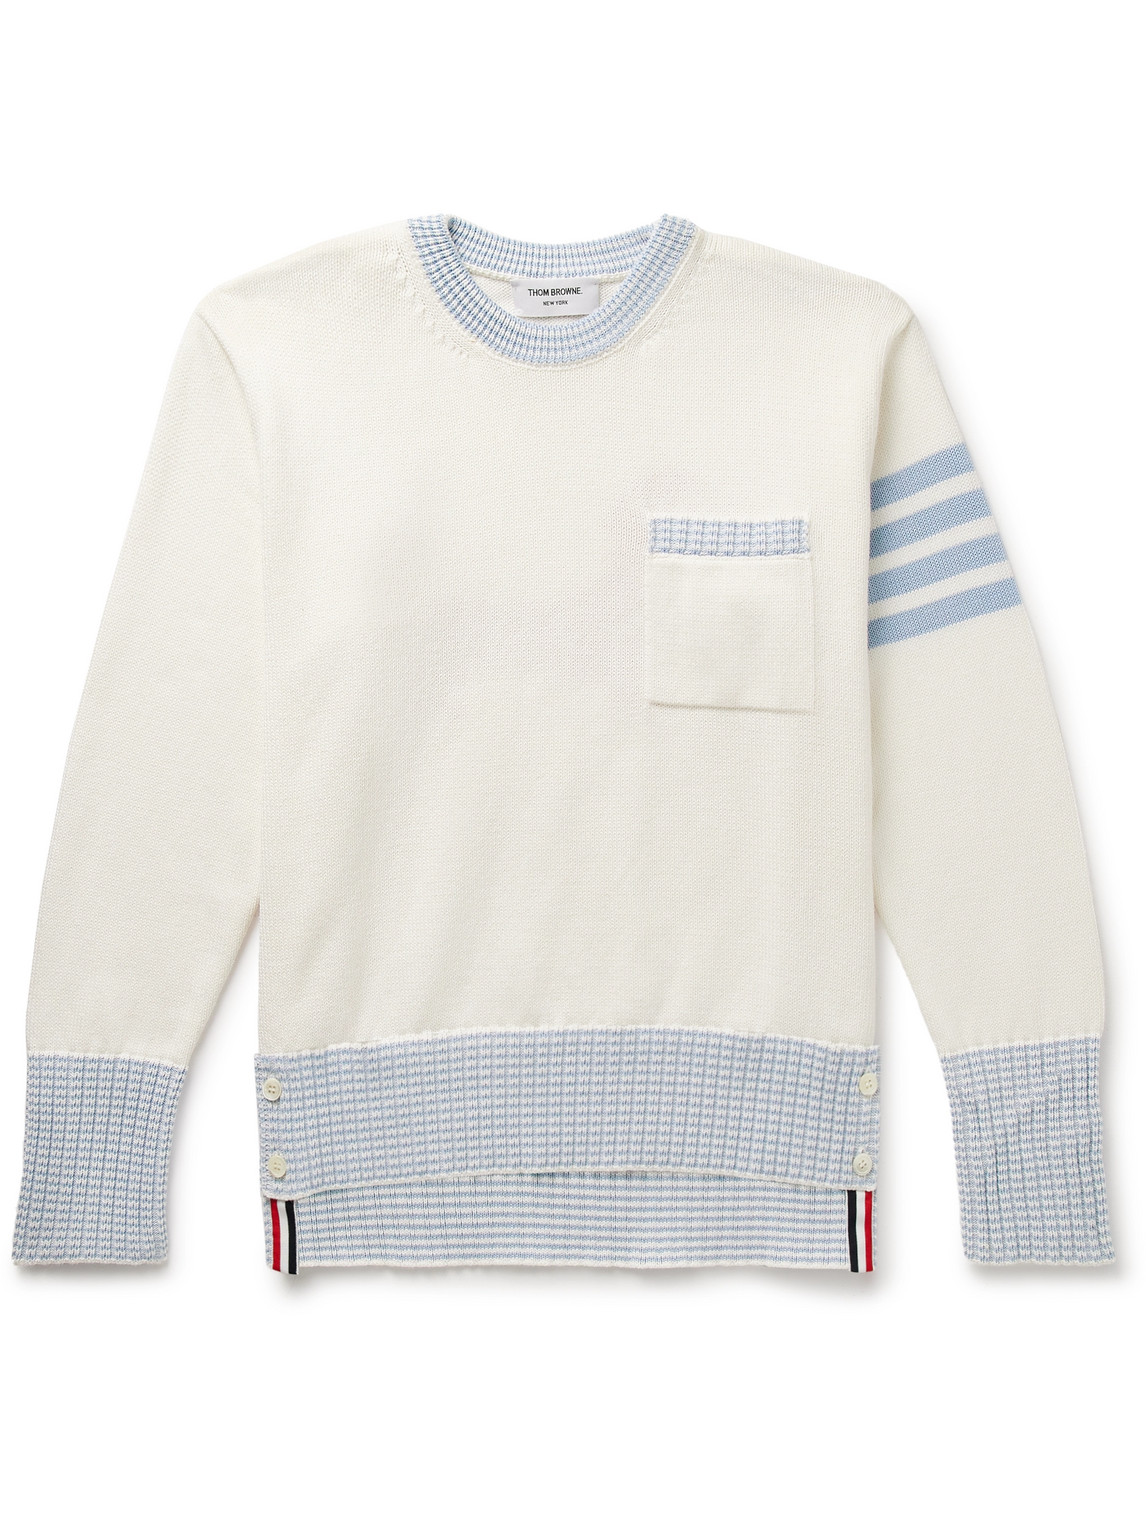 THOM BROWNE HECTOR STRIPED INTARSIA-KNIT COTTON SWEATER